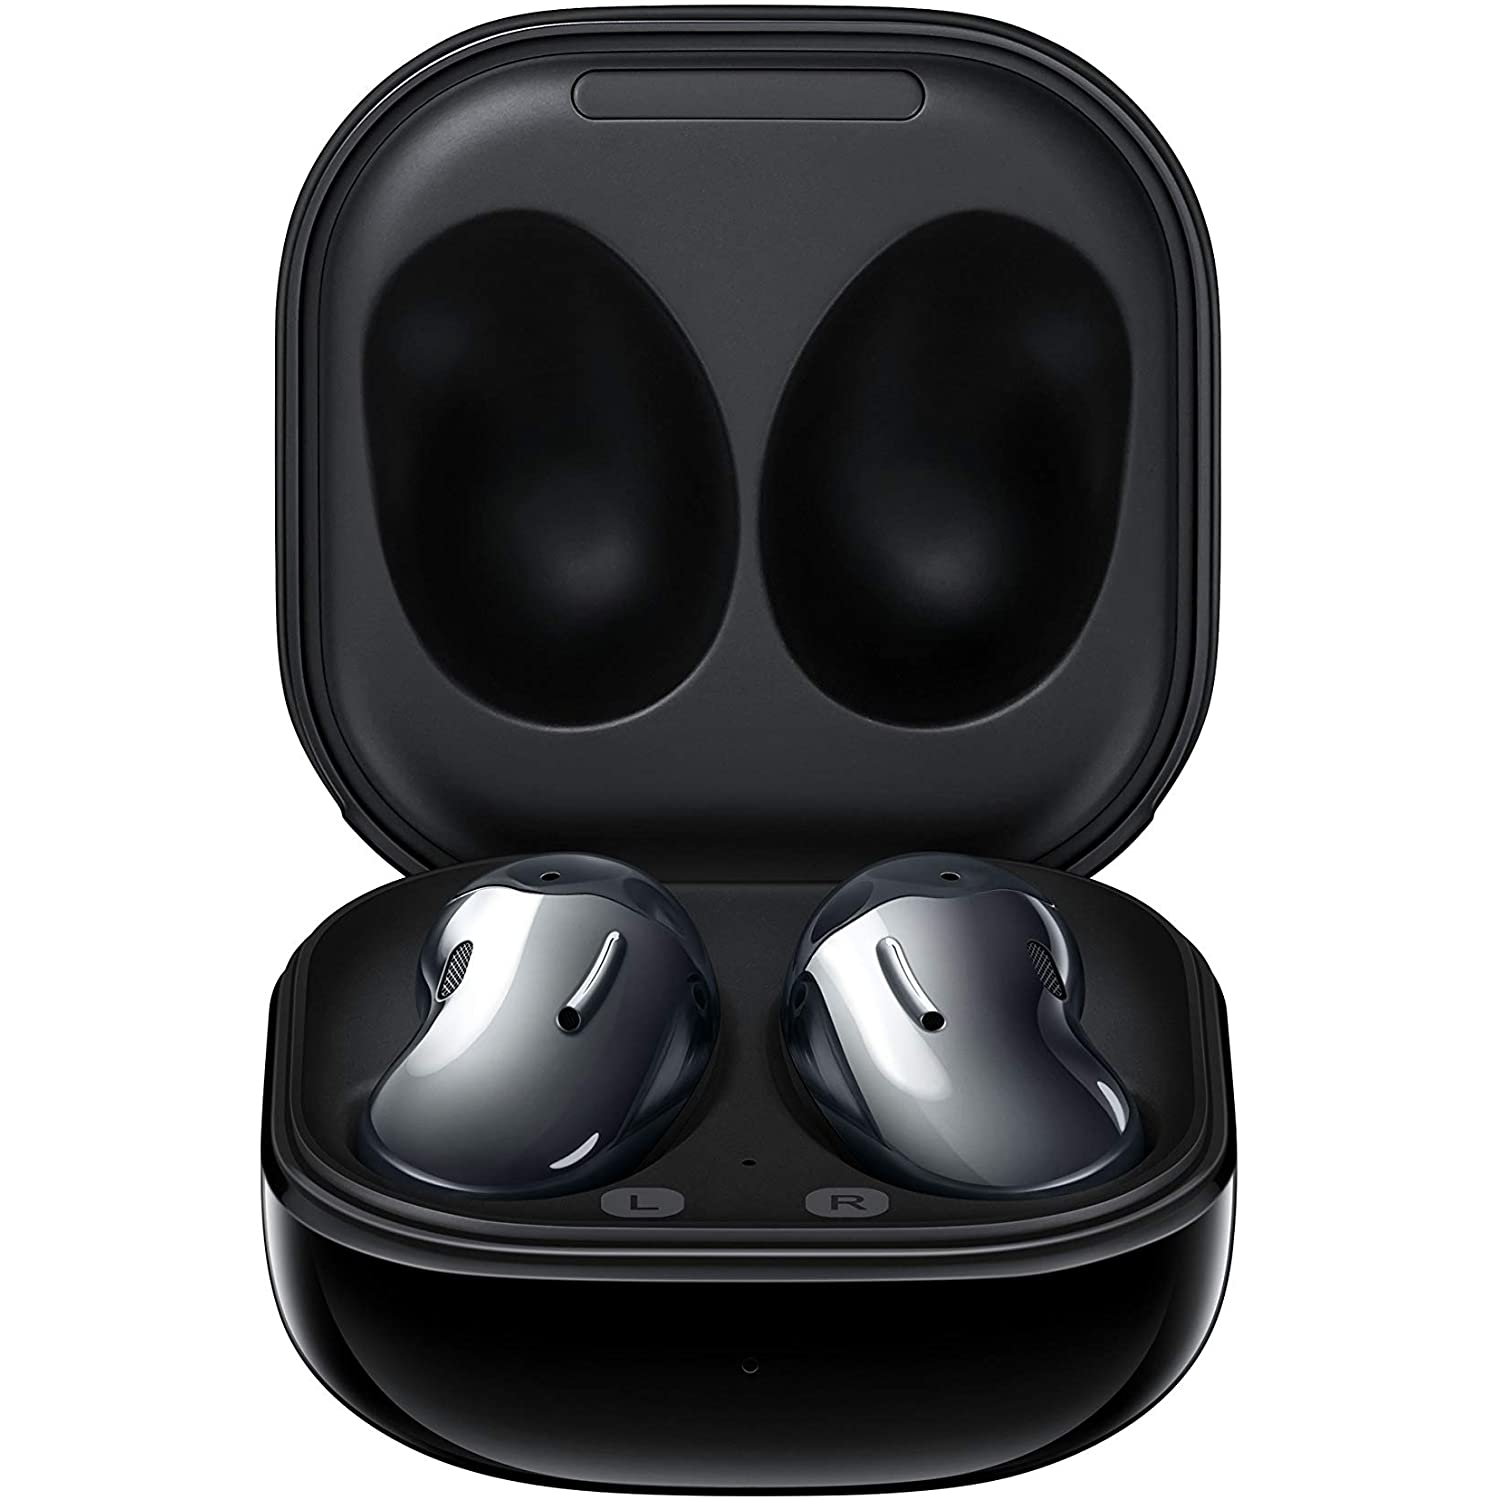 Refurbished (Good) - Samsung Galaxy Buds Live Active Noise Cancelling TWS Wireless Charging Headphones - Black